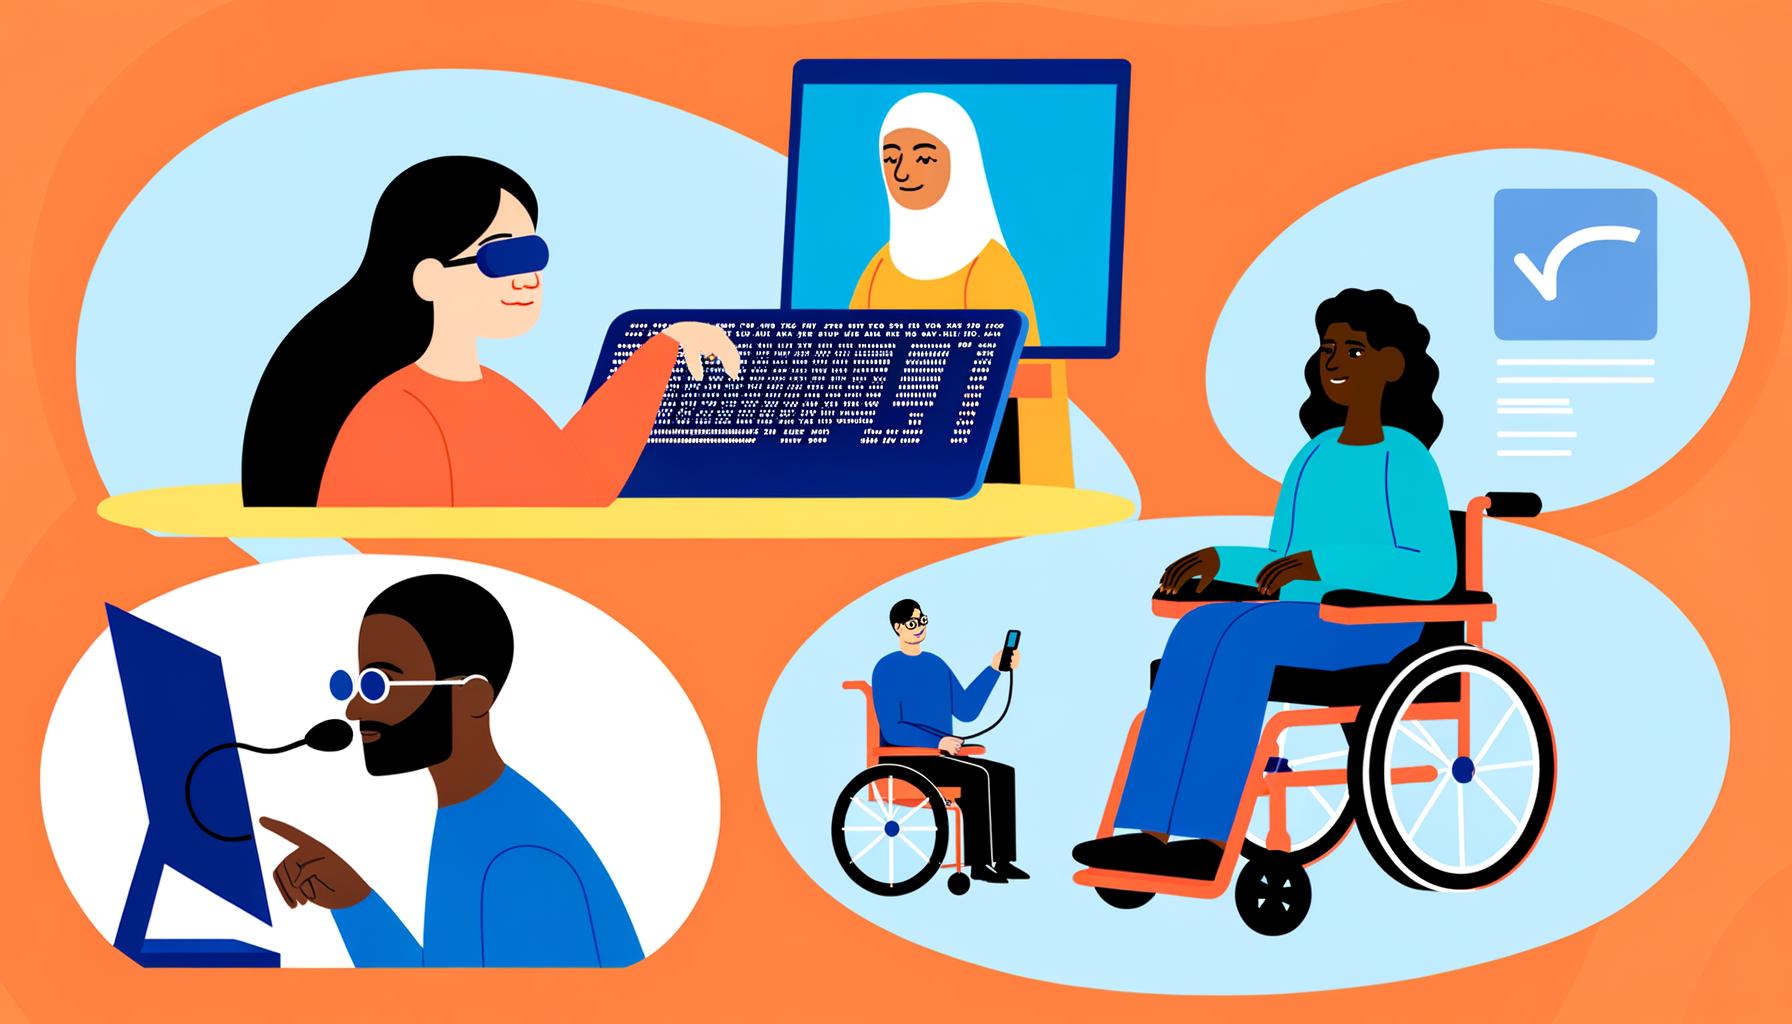 Abstract vector art representing people with disabilities interacting with technology in various forms.